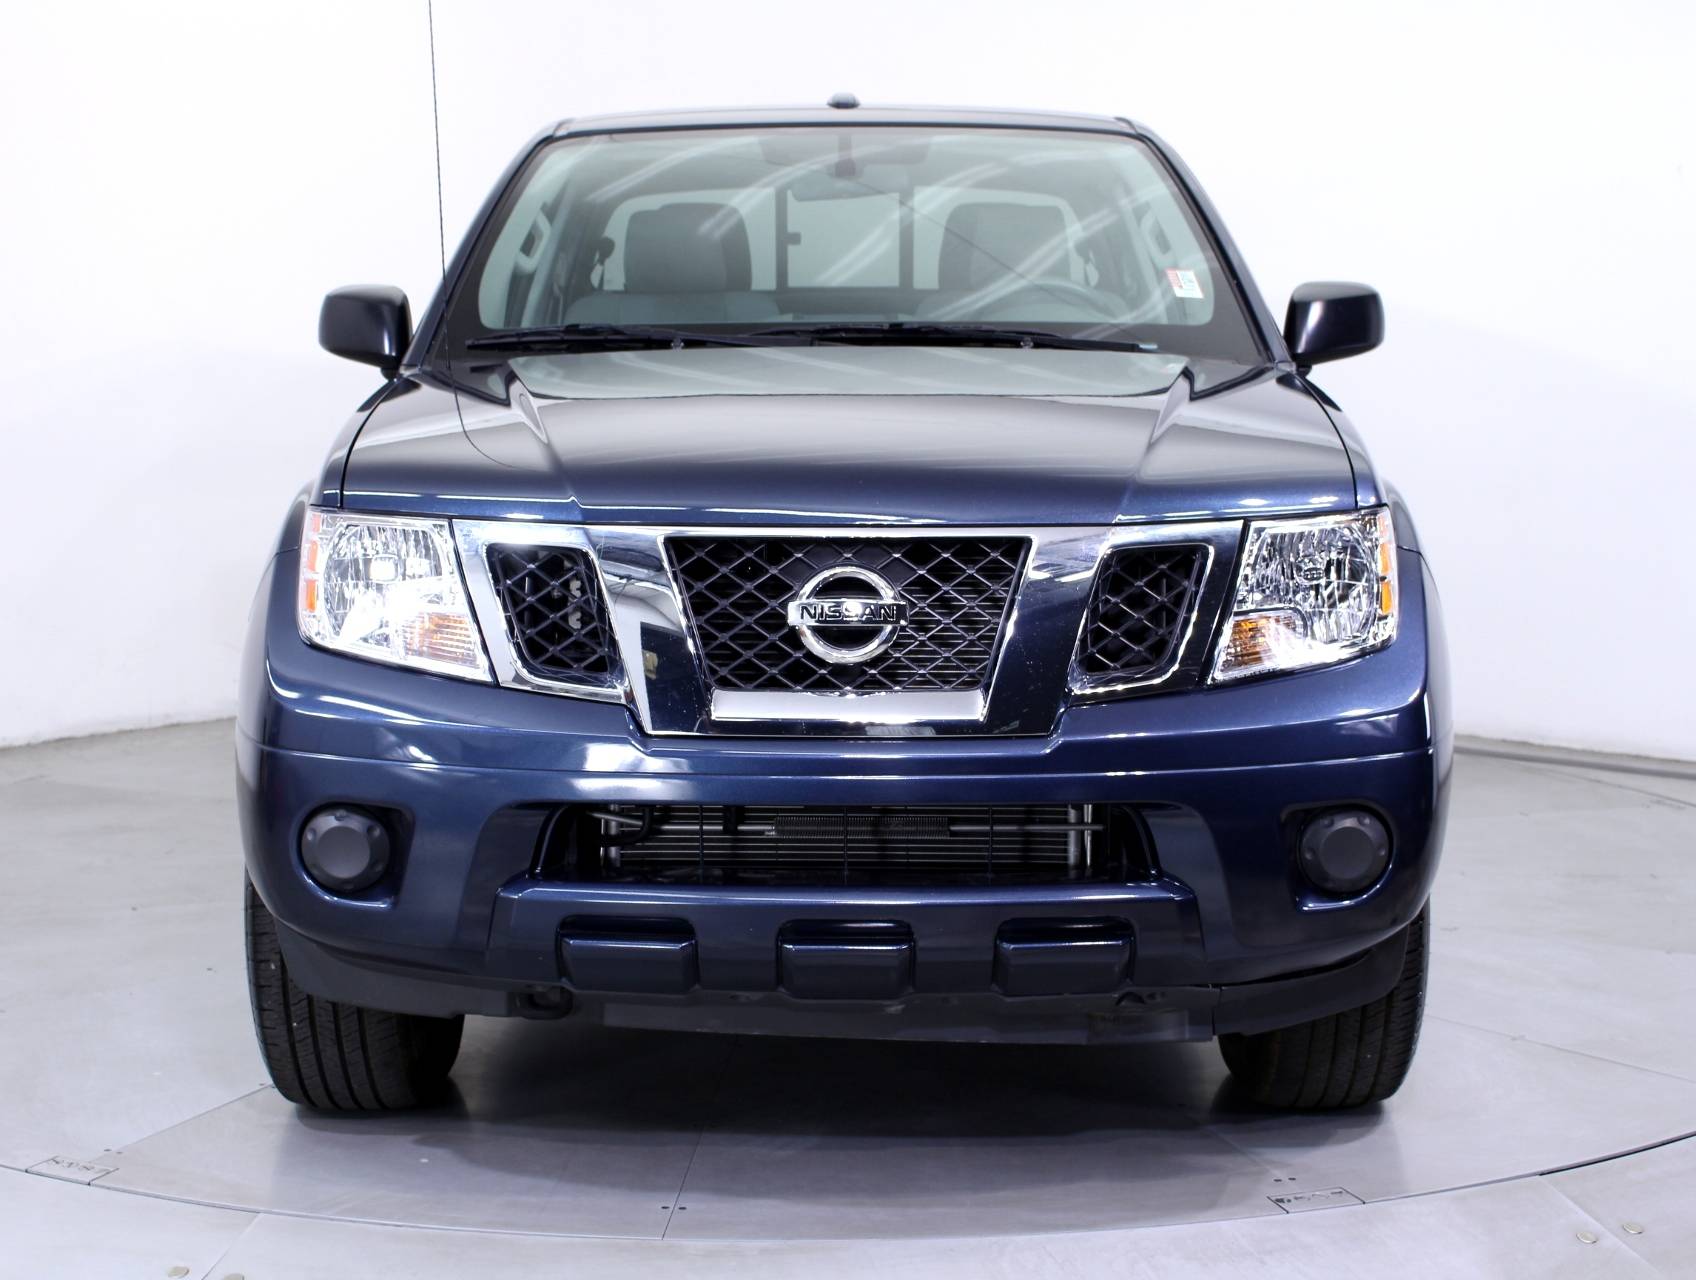 Florida Fine Cars - Used NISSAN FRONTIER 2016 MIAMI Sv 4wd